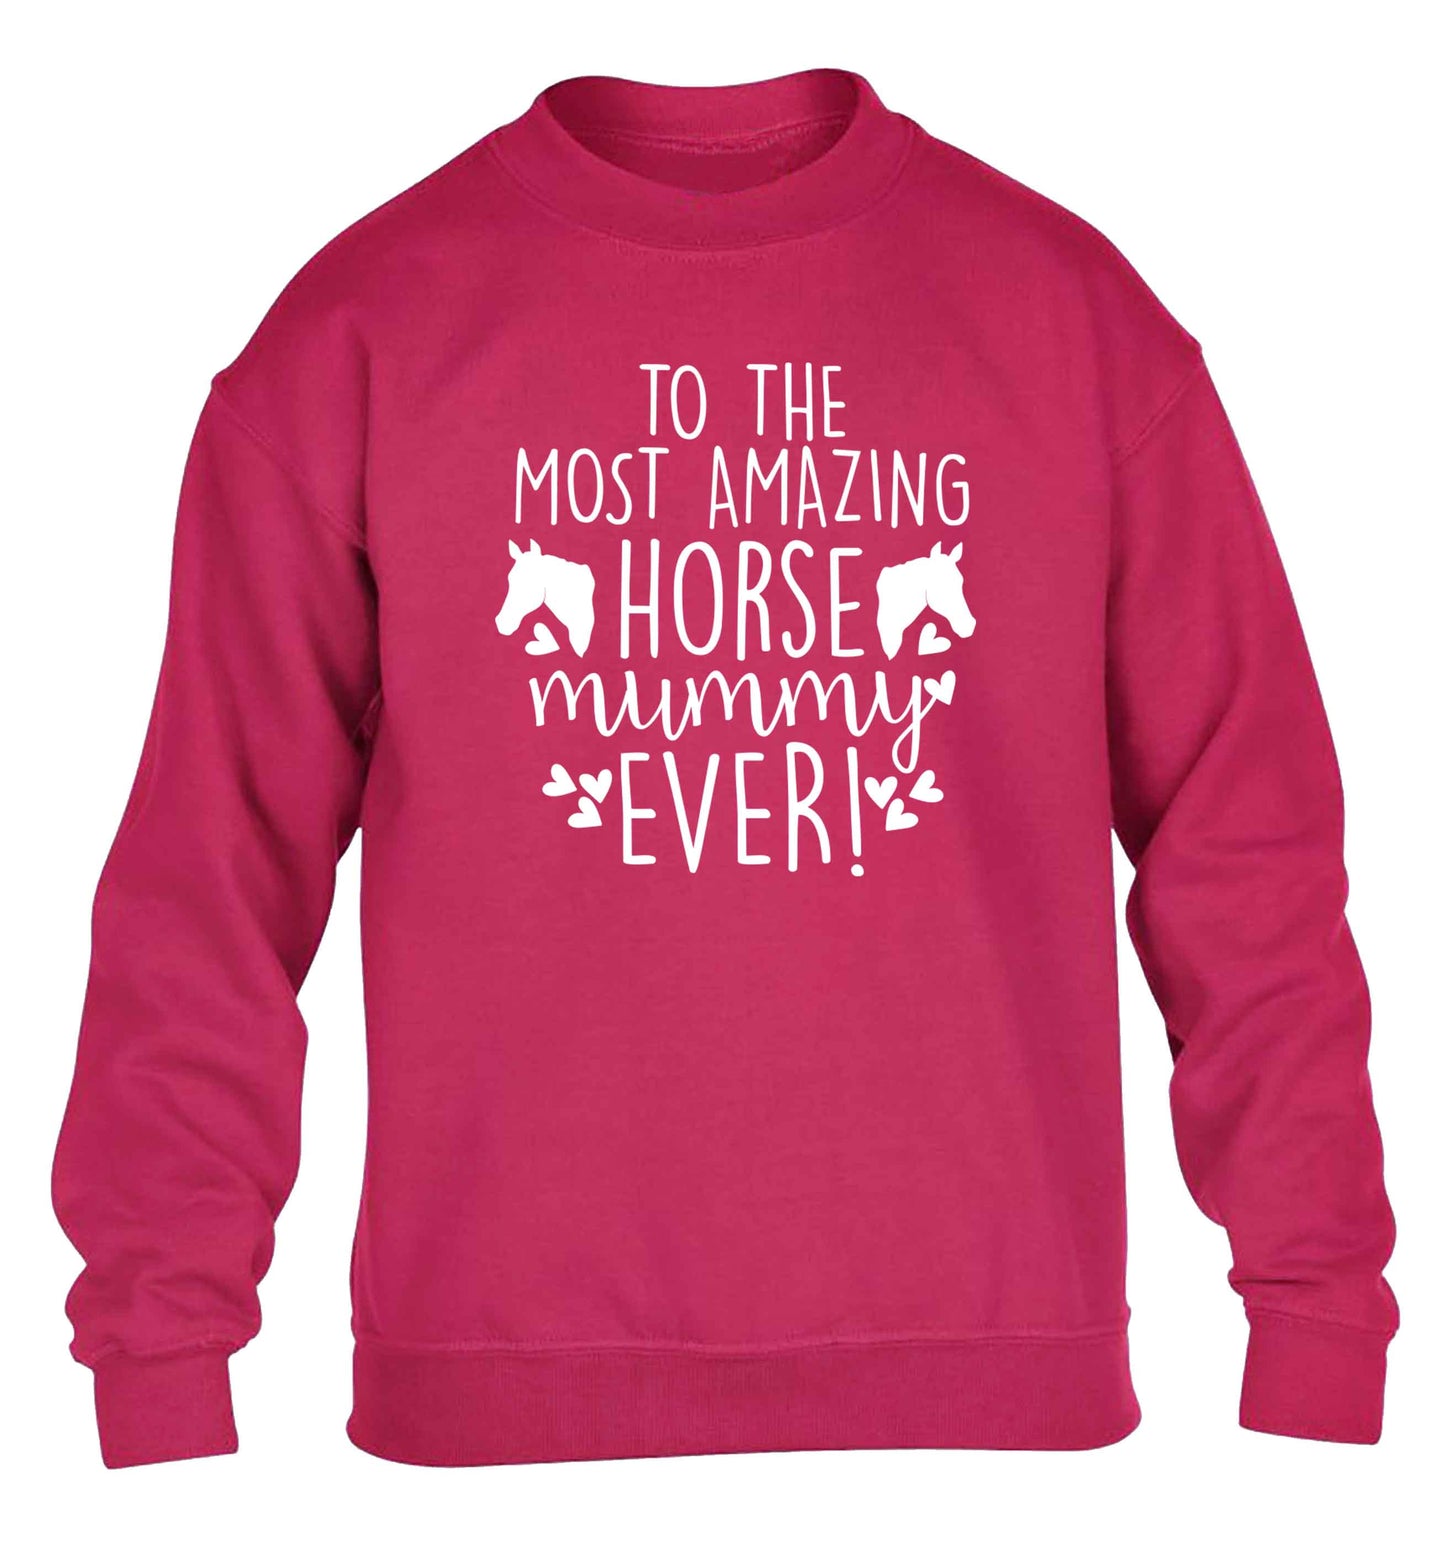 To the most amazing horse mummy ever! children's pink sweater 12-13 Years